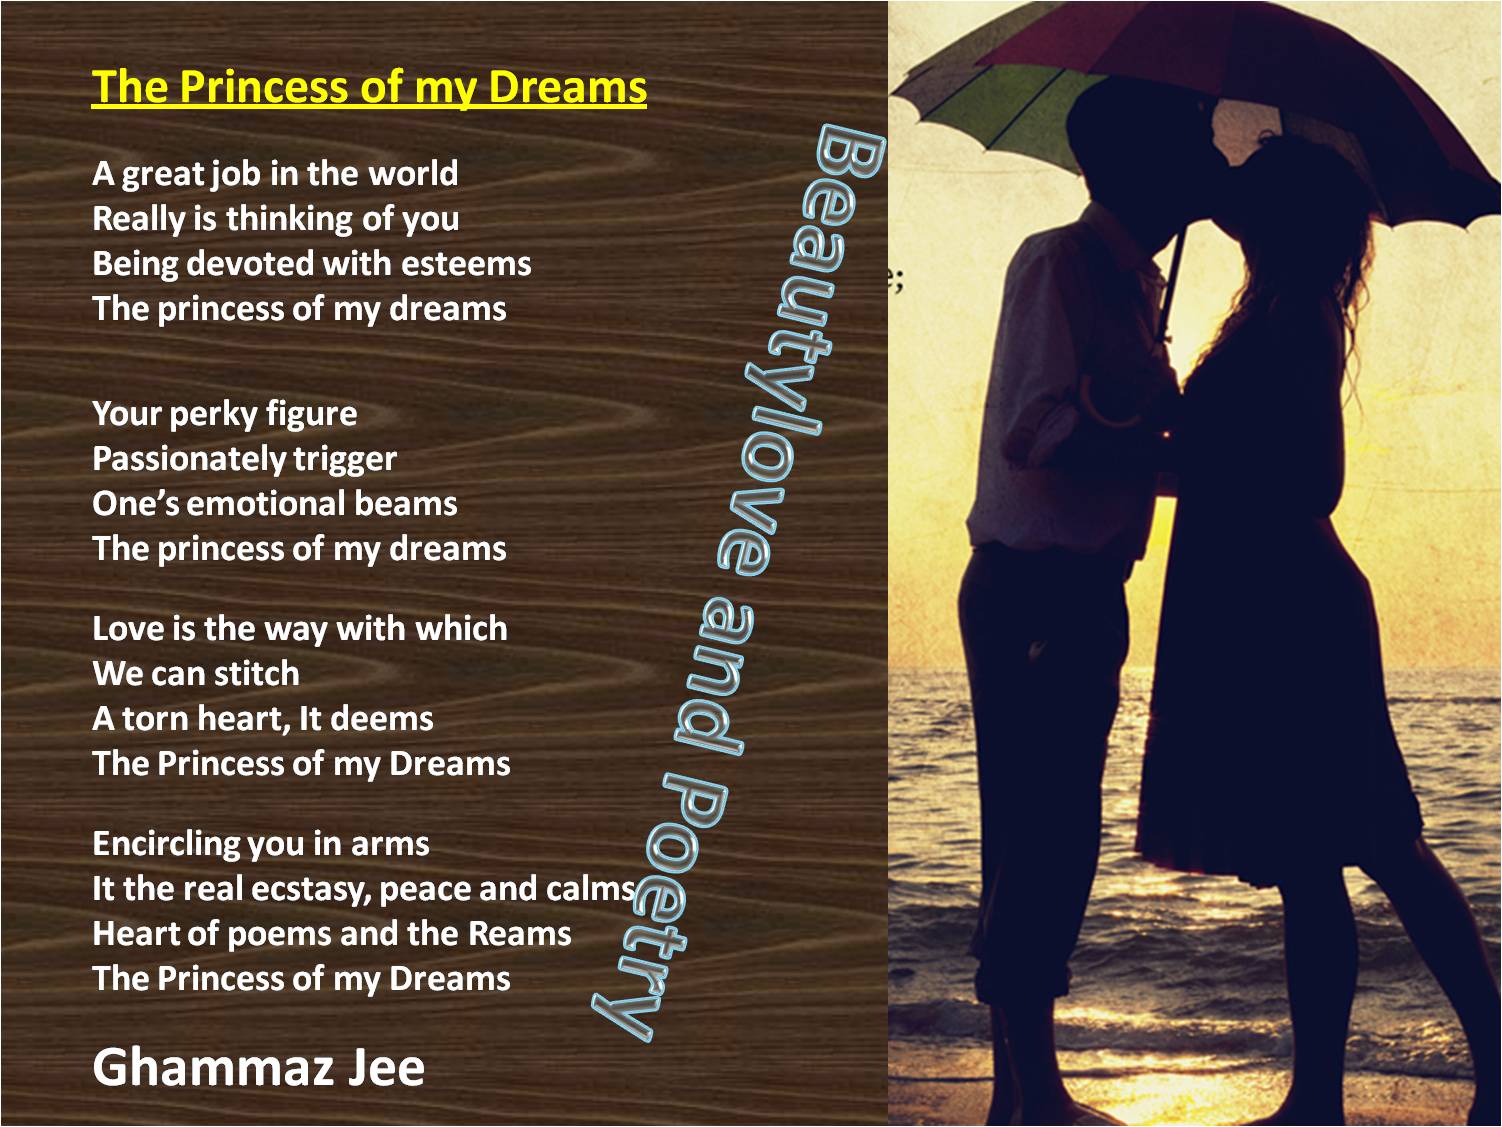 You are my dream girl poem